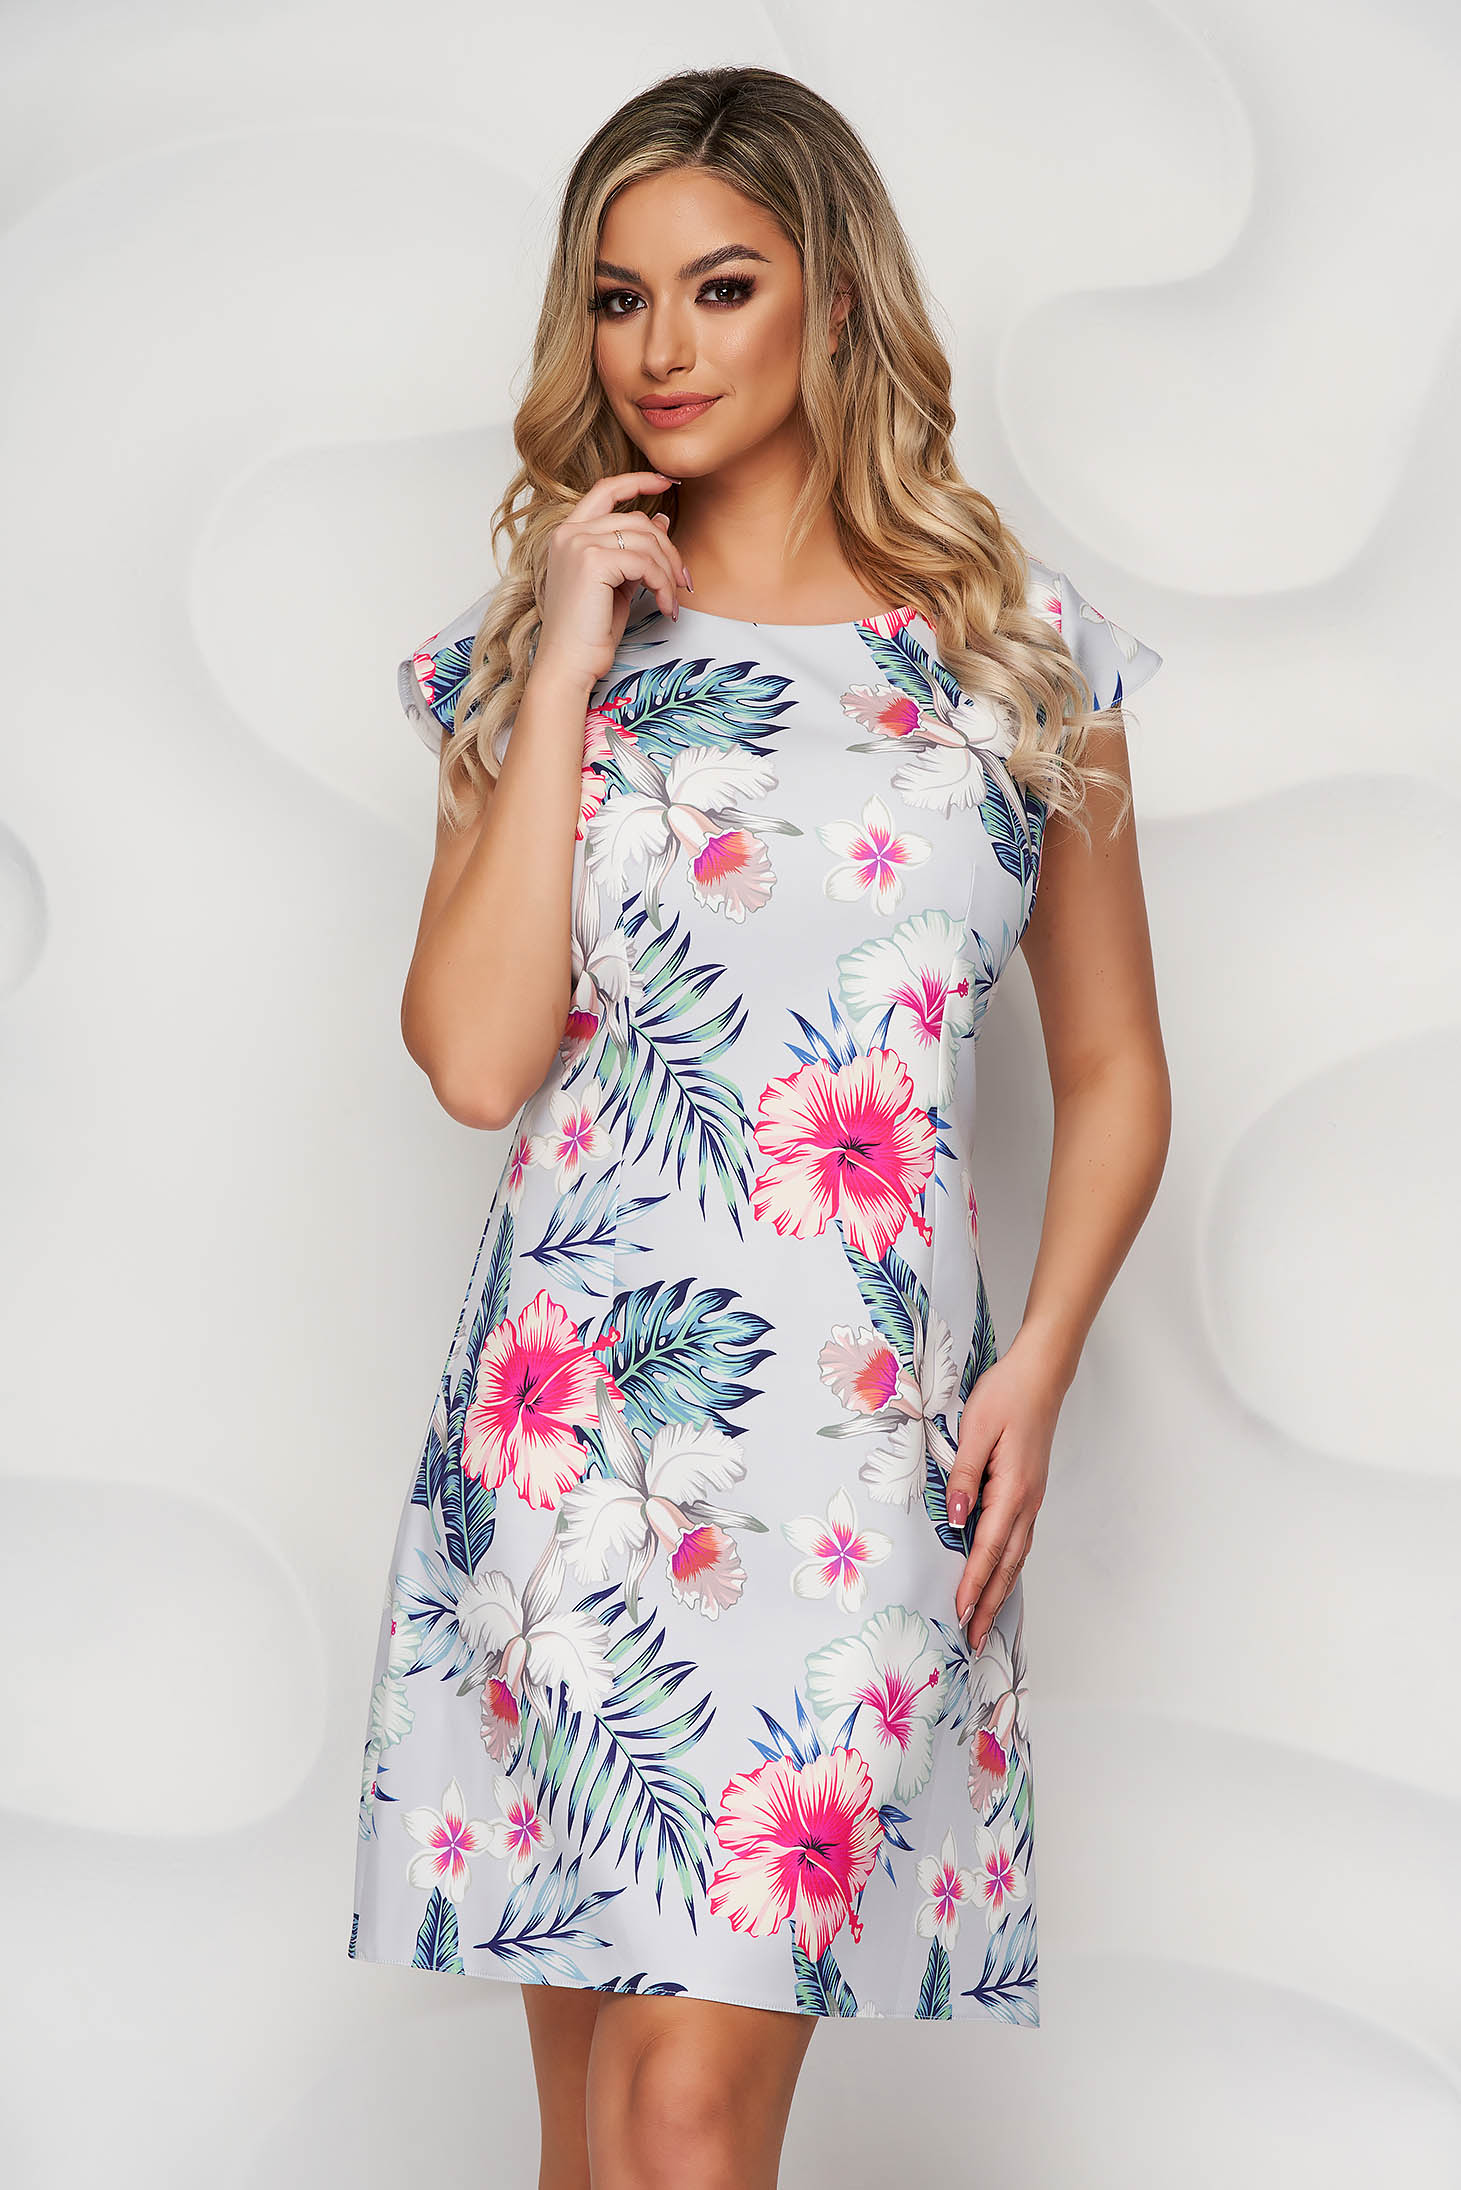 Dress from elastic fabric a-line with rounded cleavage with floral print